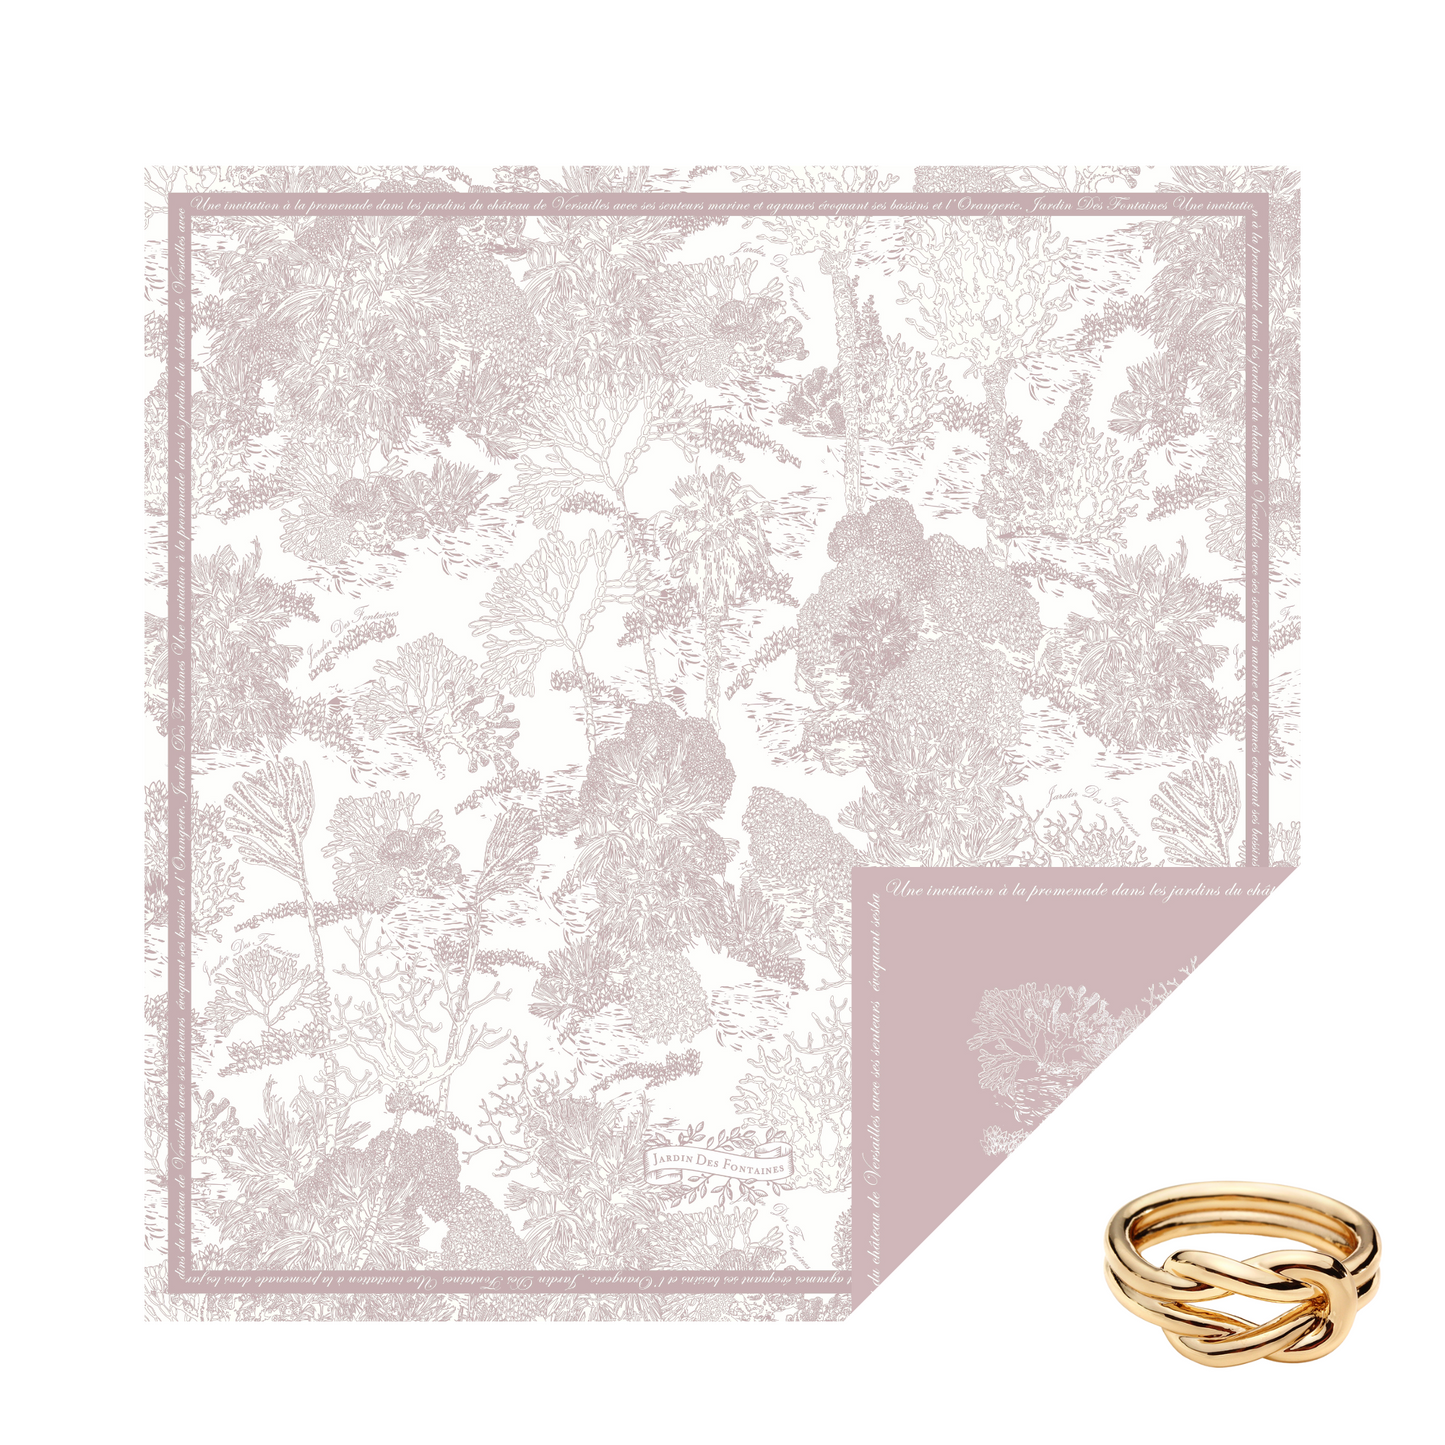 "Toile De Jouy" Silky Scarf Gift Set (Double Face Silky Scarf and Scarf Ring)